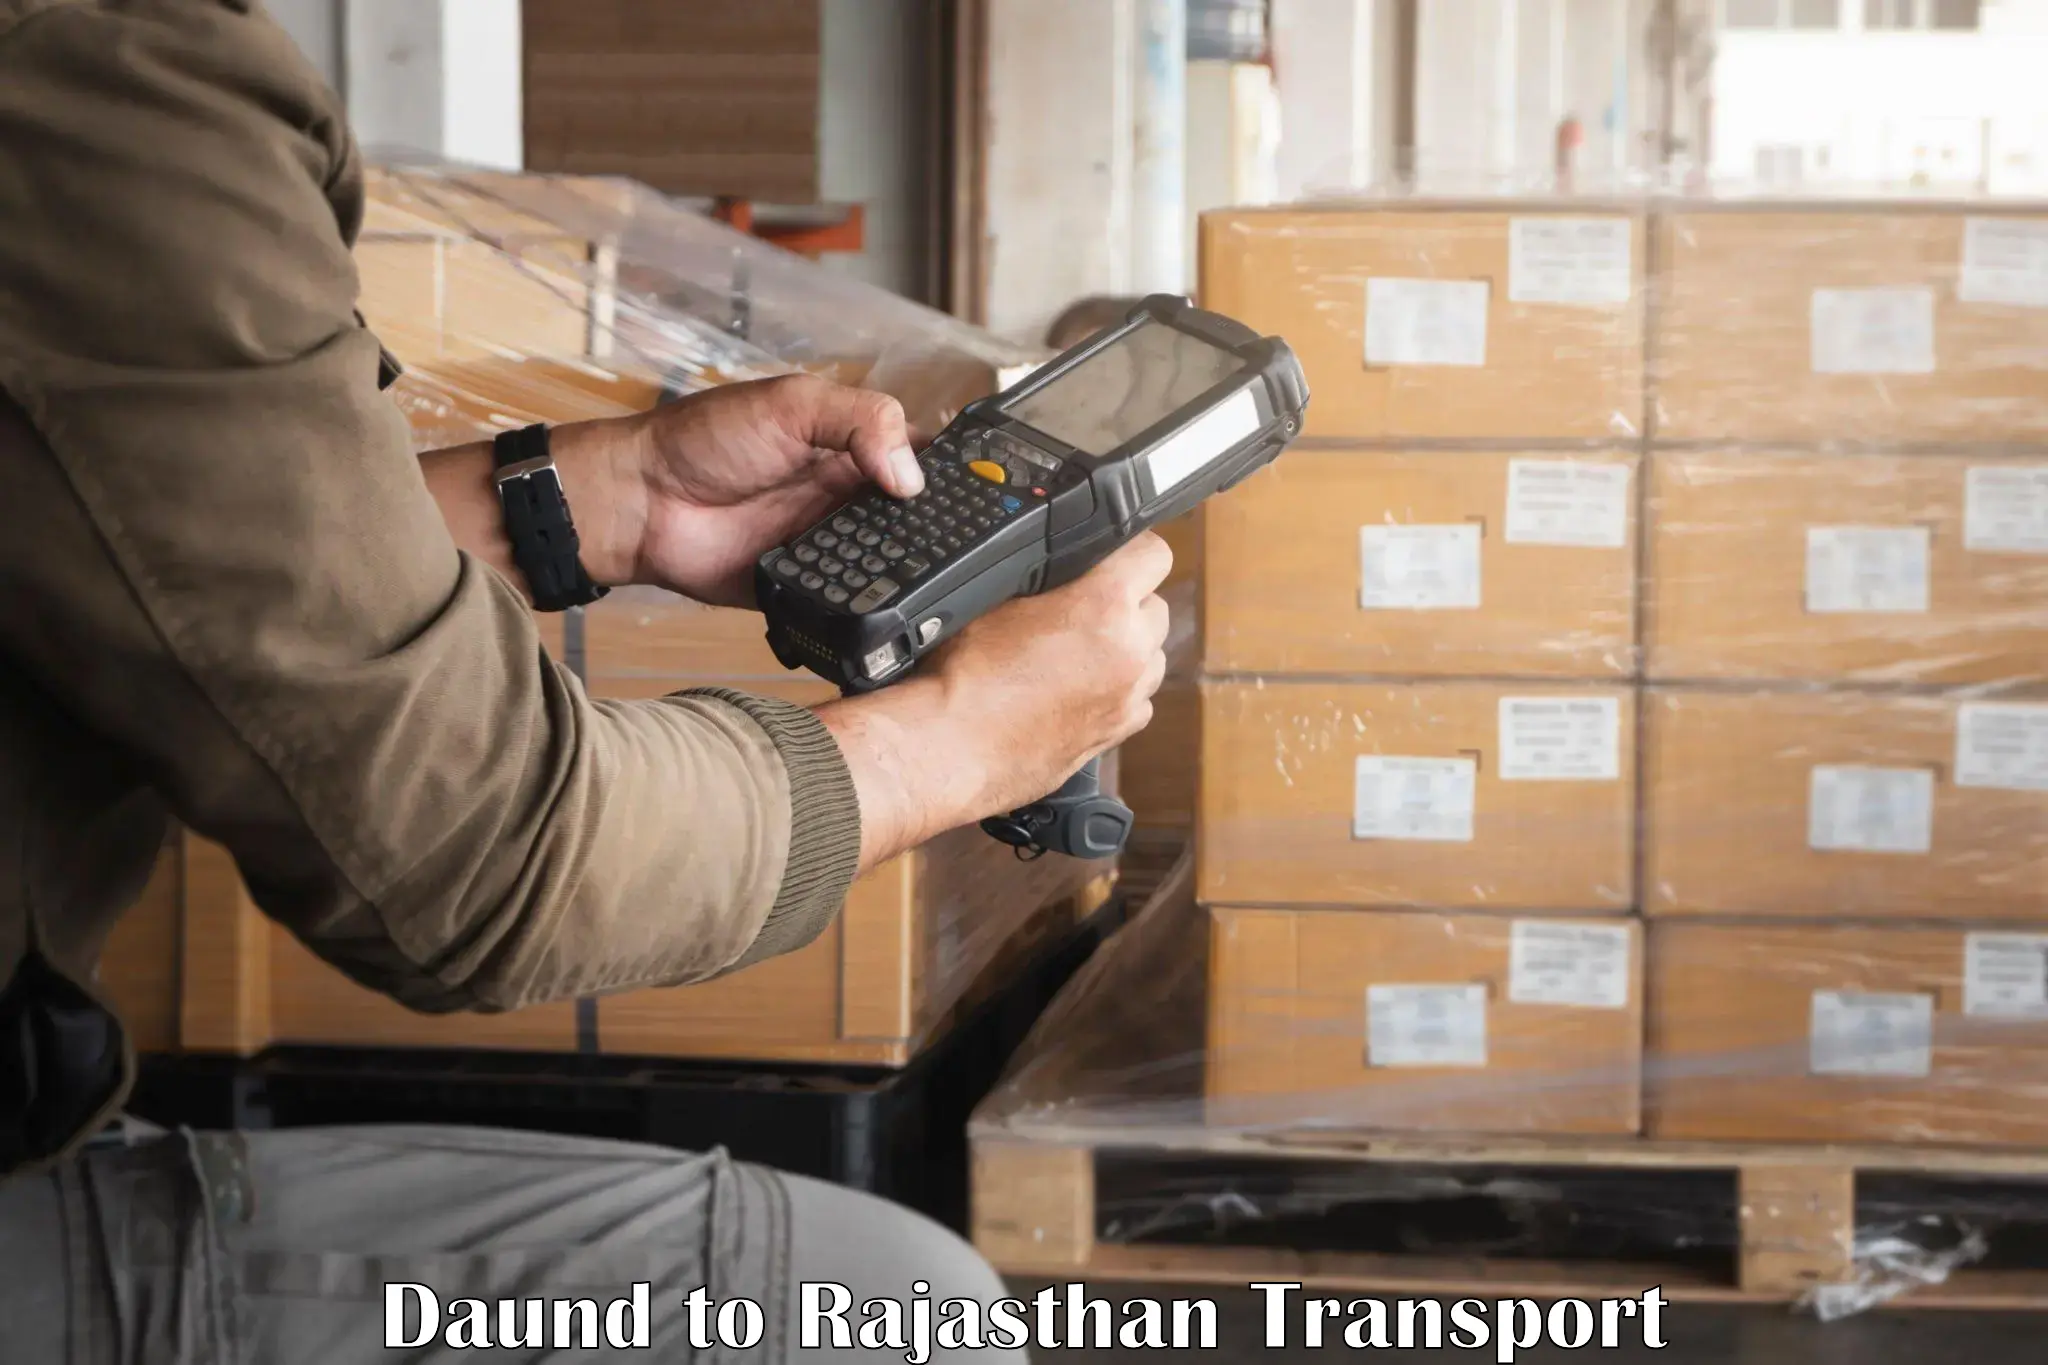 Container transport service Daund to Rajasthan